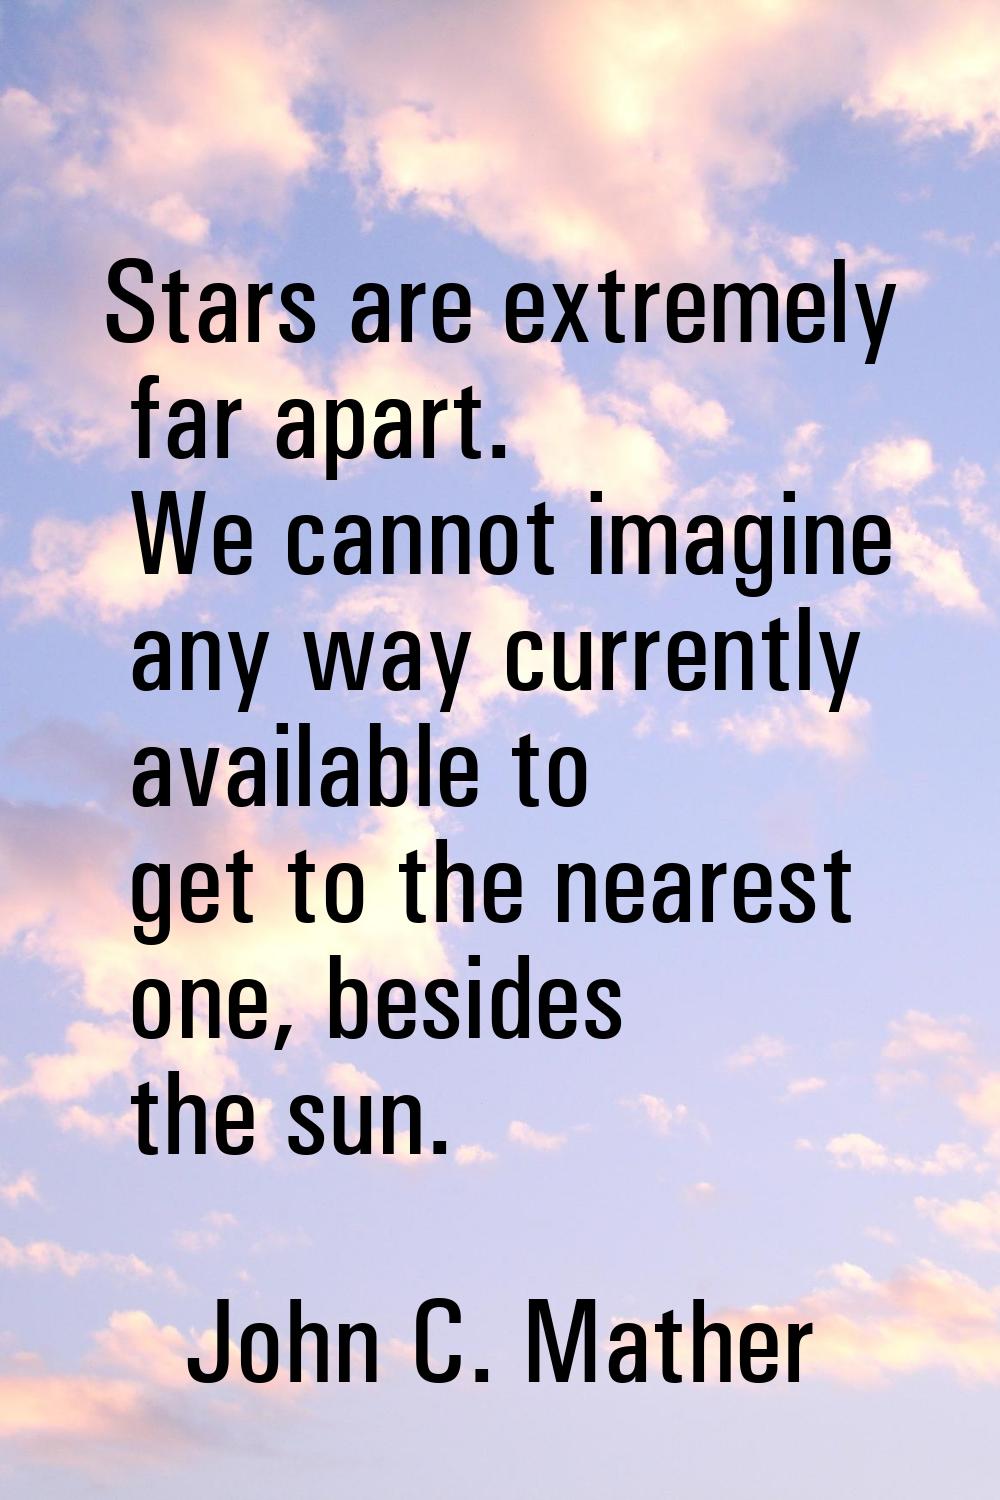 Stars are extremely far apart. We cannot imagine any way currently available to get to the nearest 